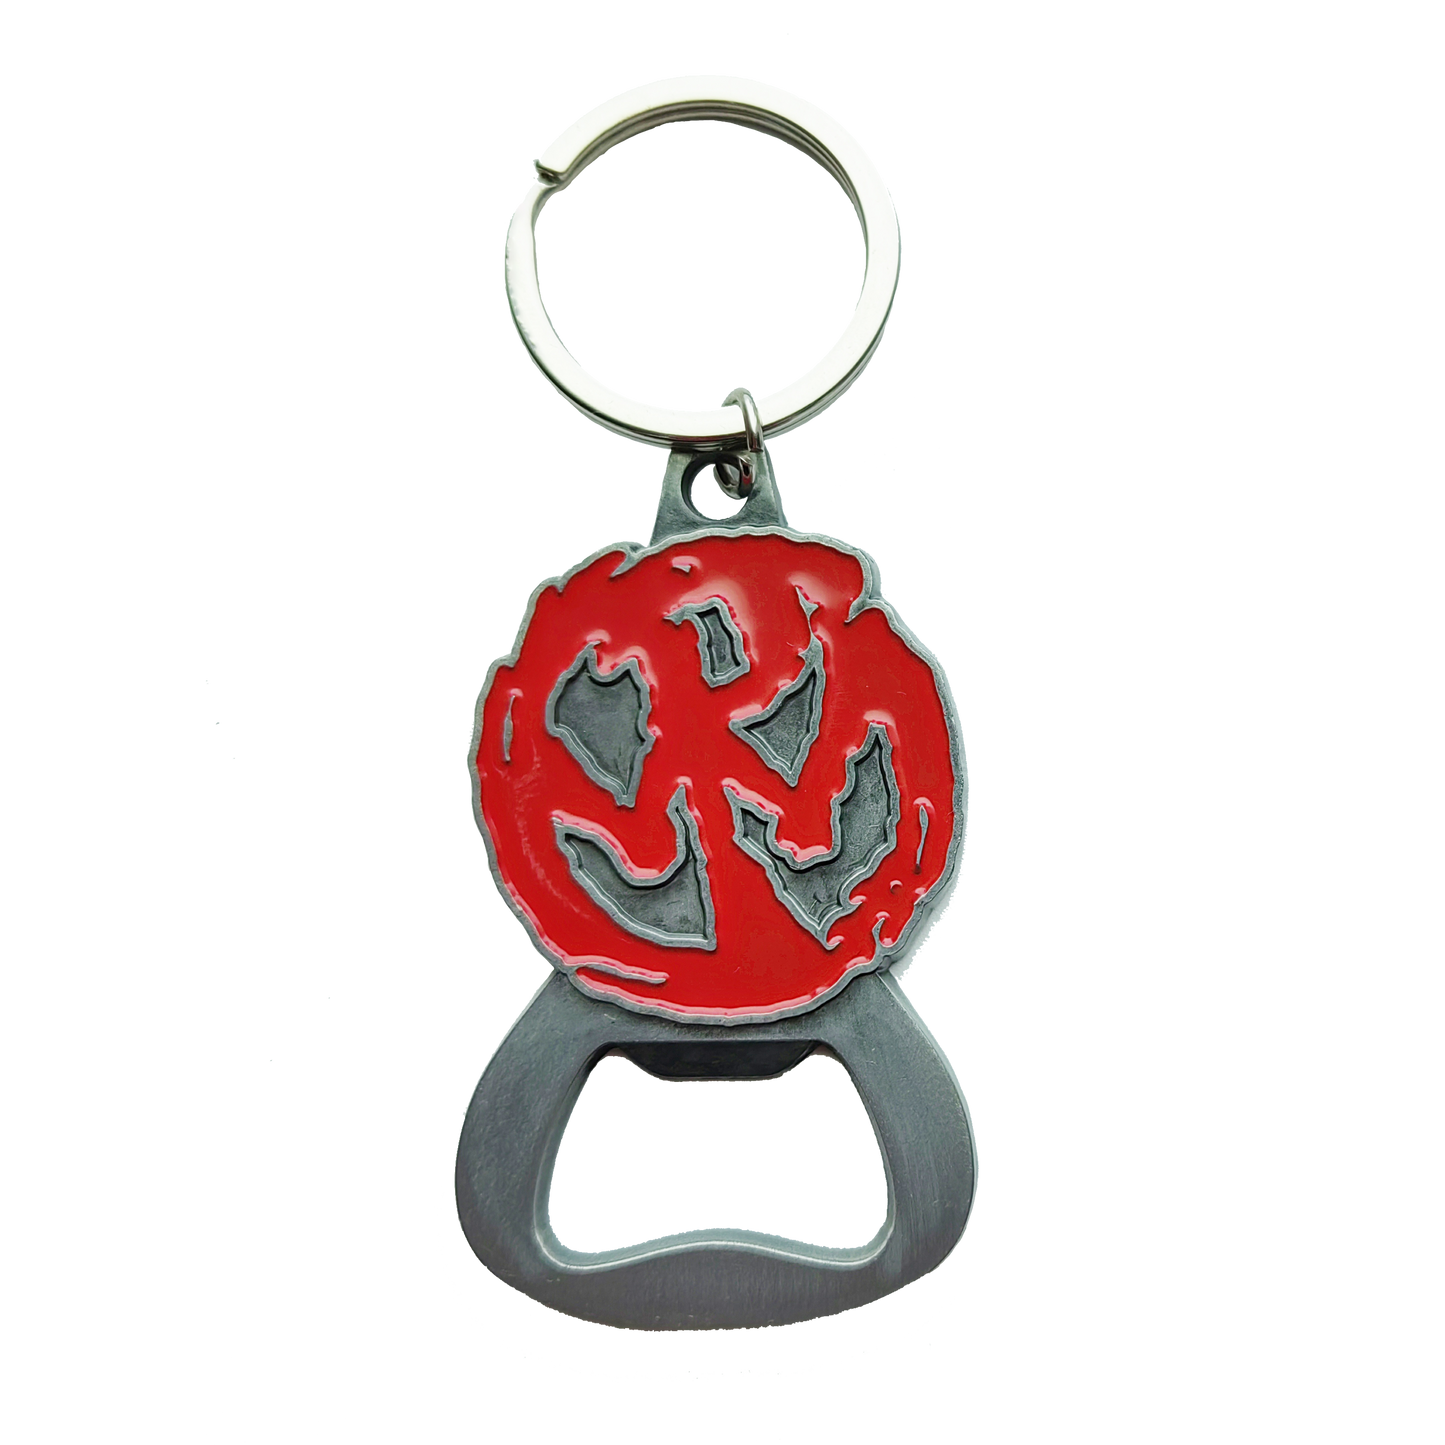 PENNYWISE - "Circle Logo" (Red) (Keychain / Bottle Opener)